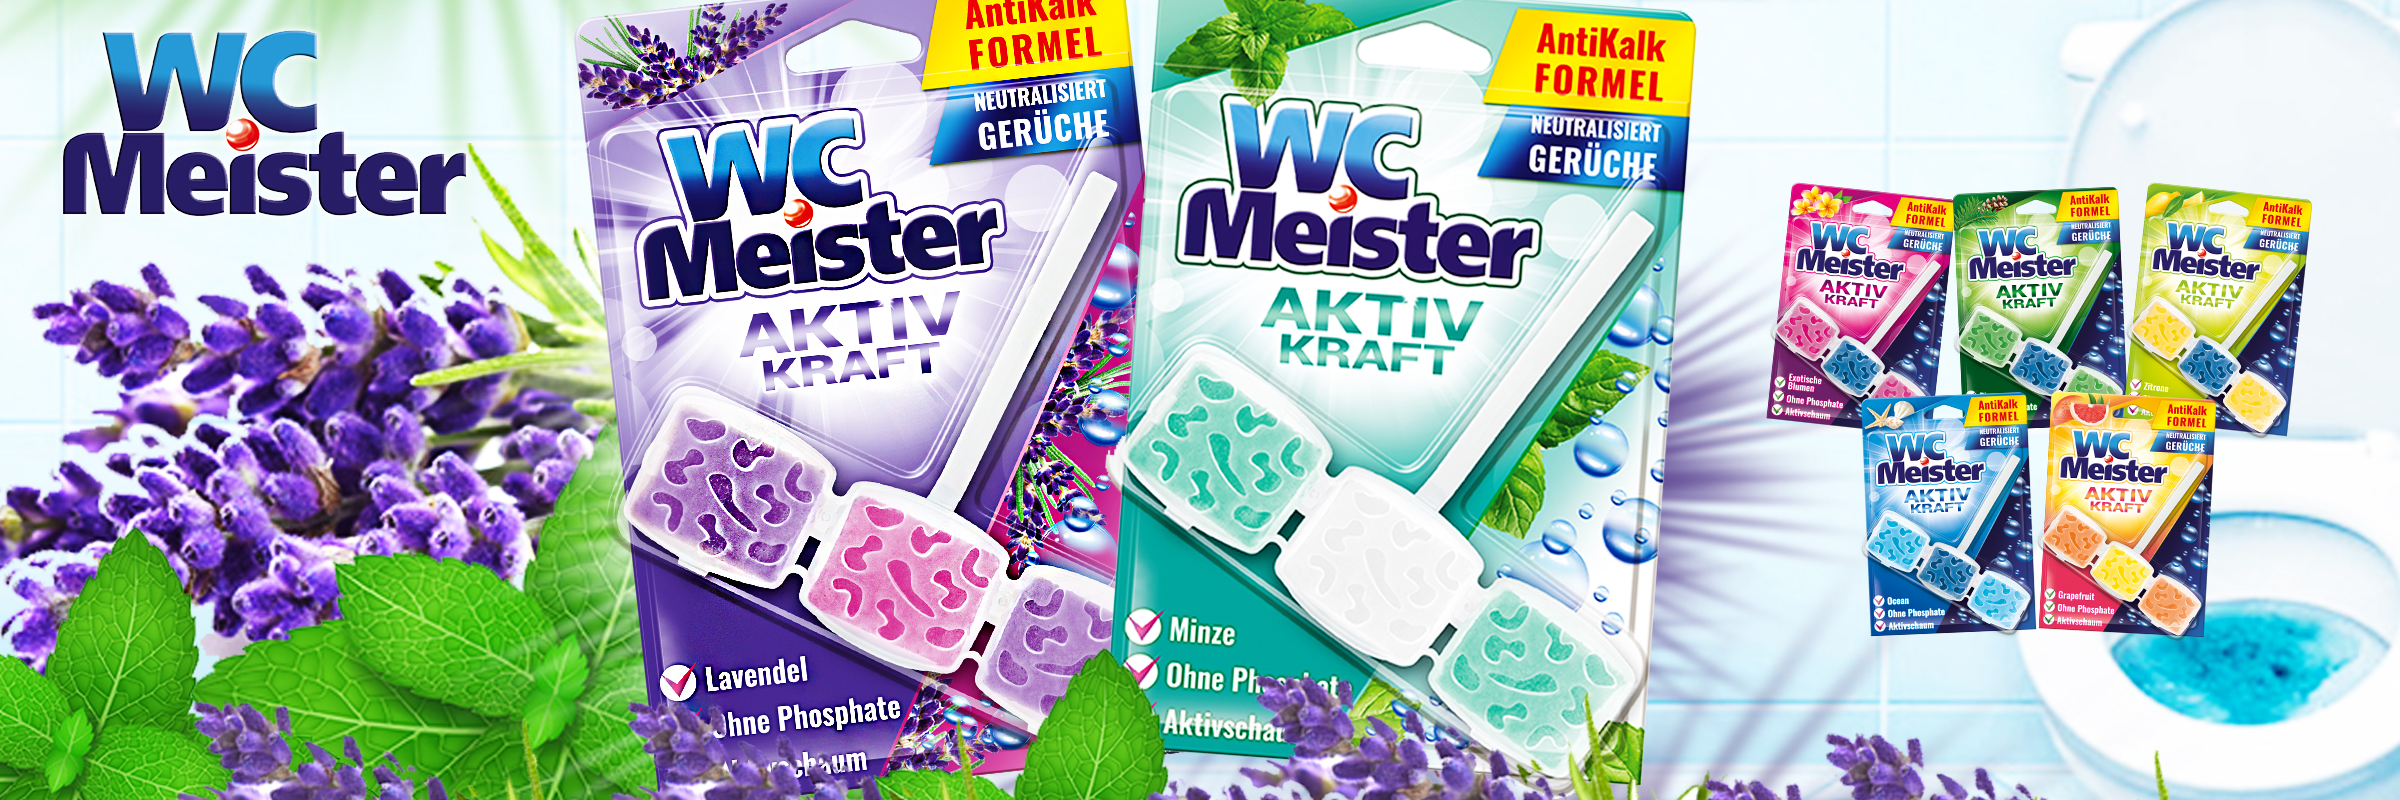 New fragrances of WC Meister toilet rim cages - lavender and mint